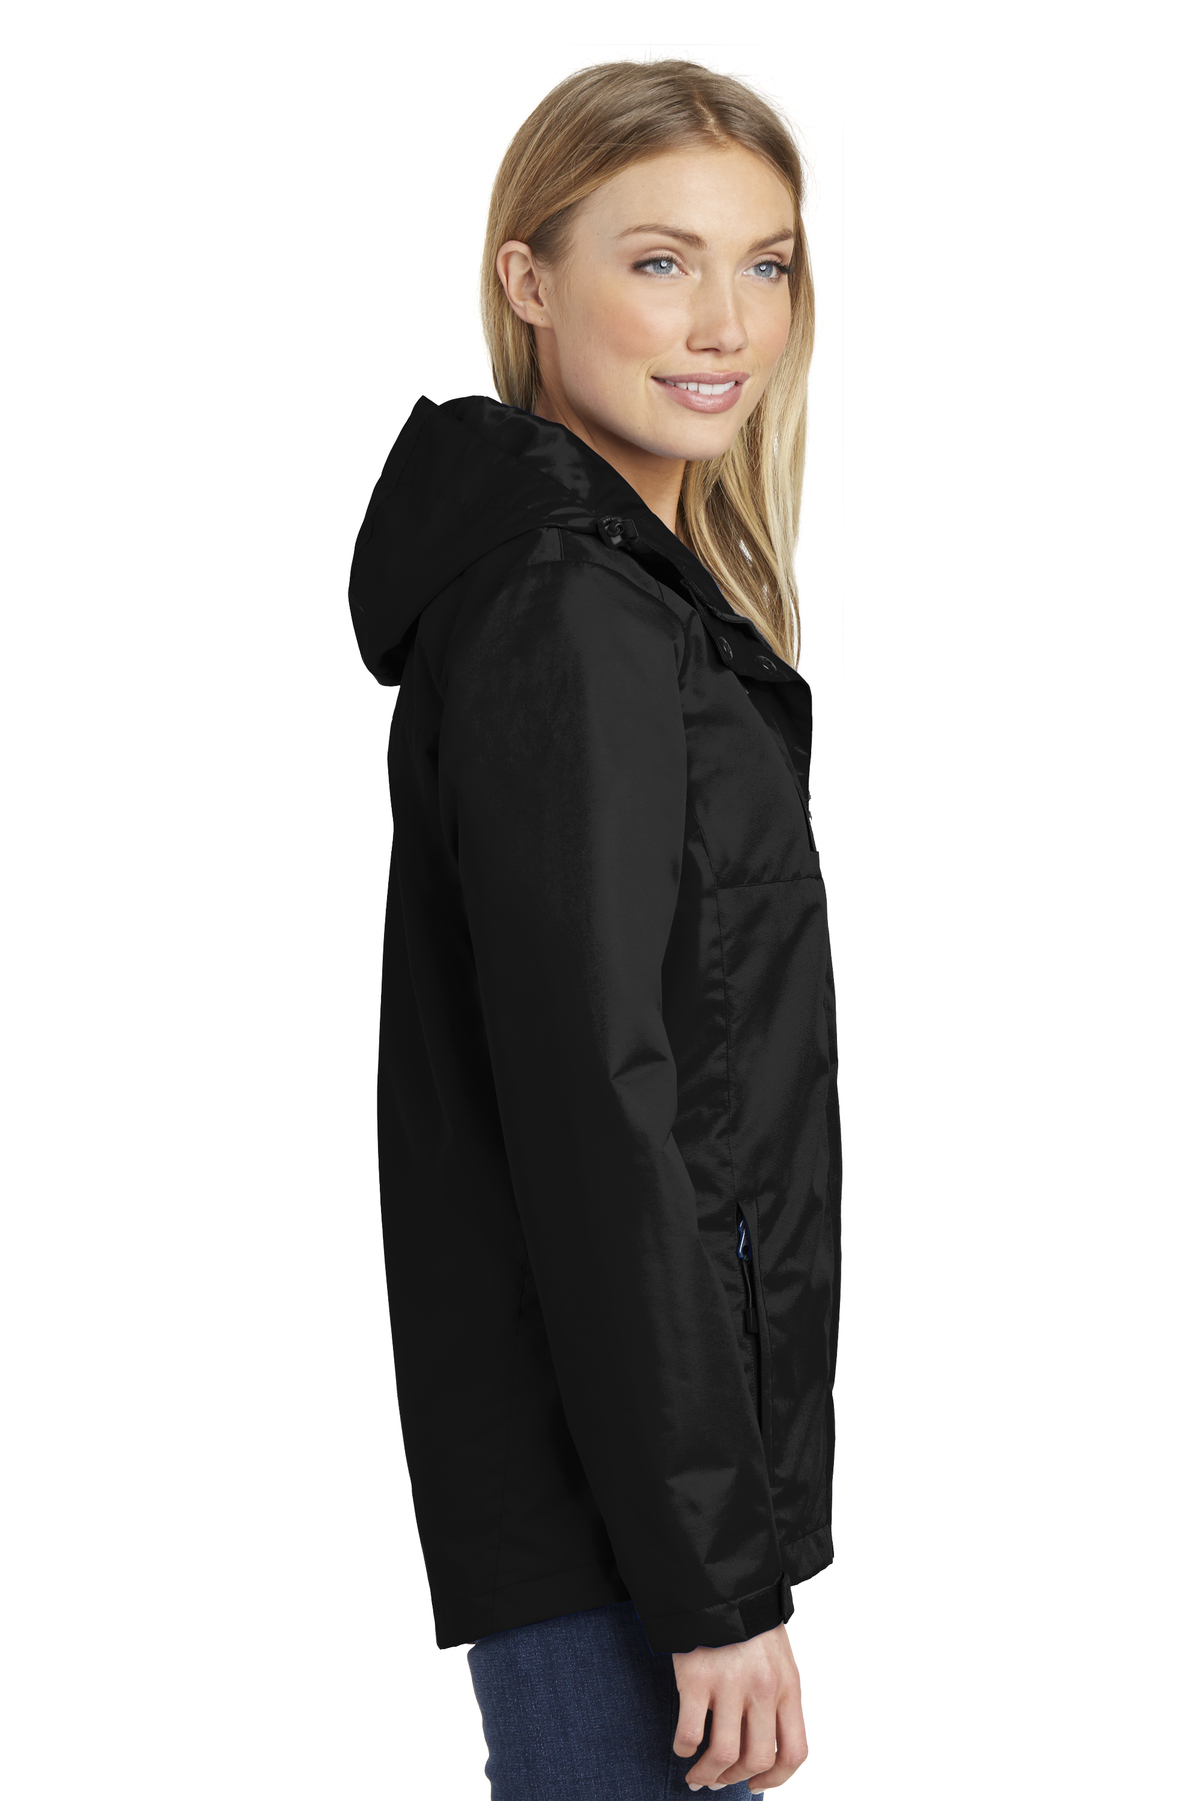 Port Authority Ladies All-Conditions Jacket | Product | SanMar